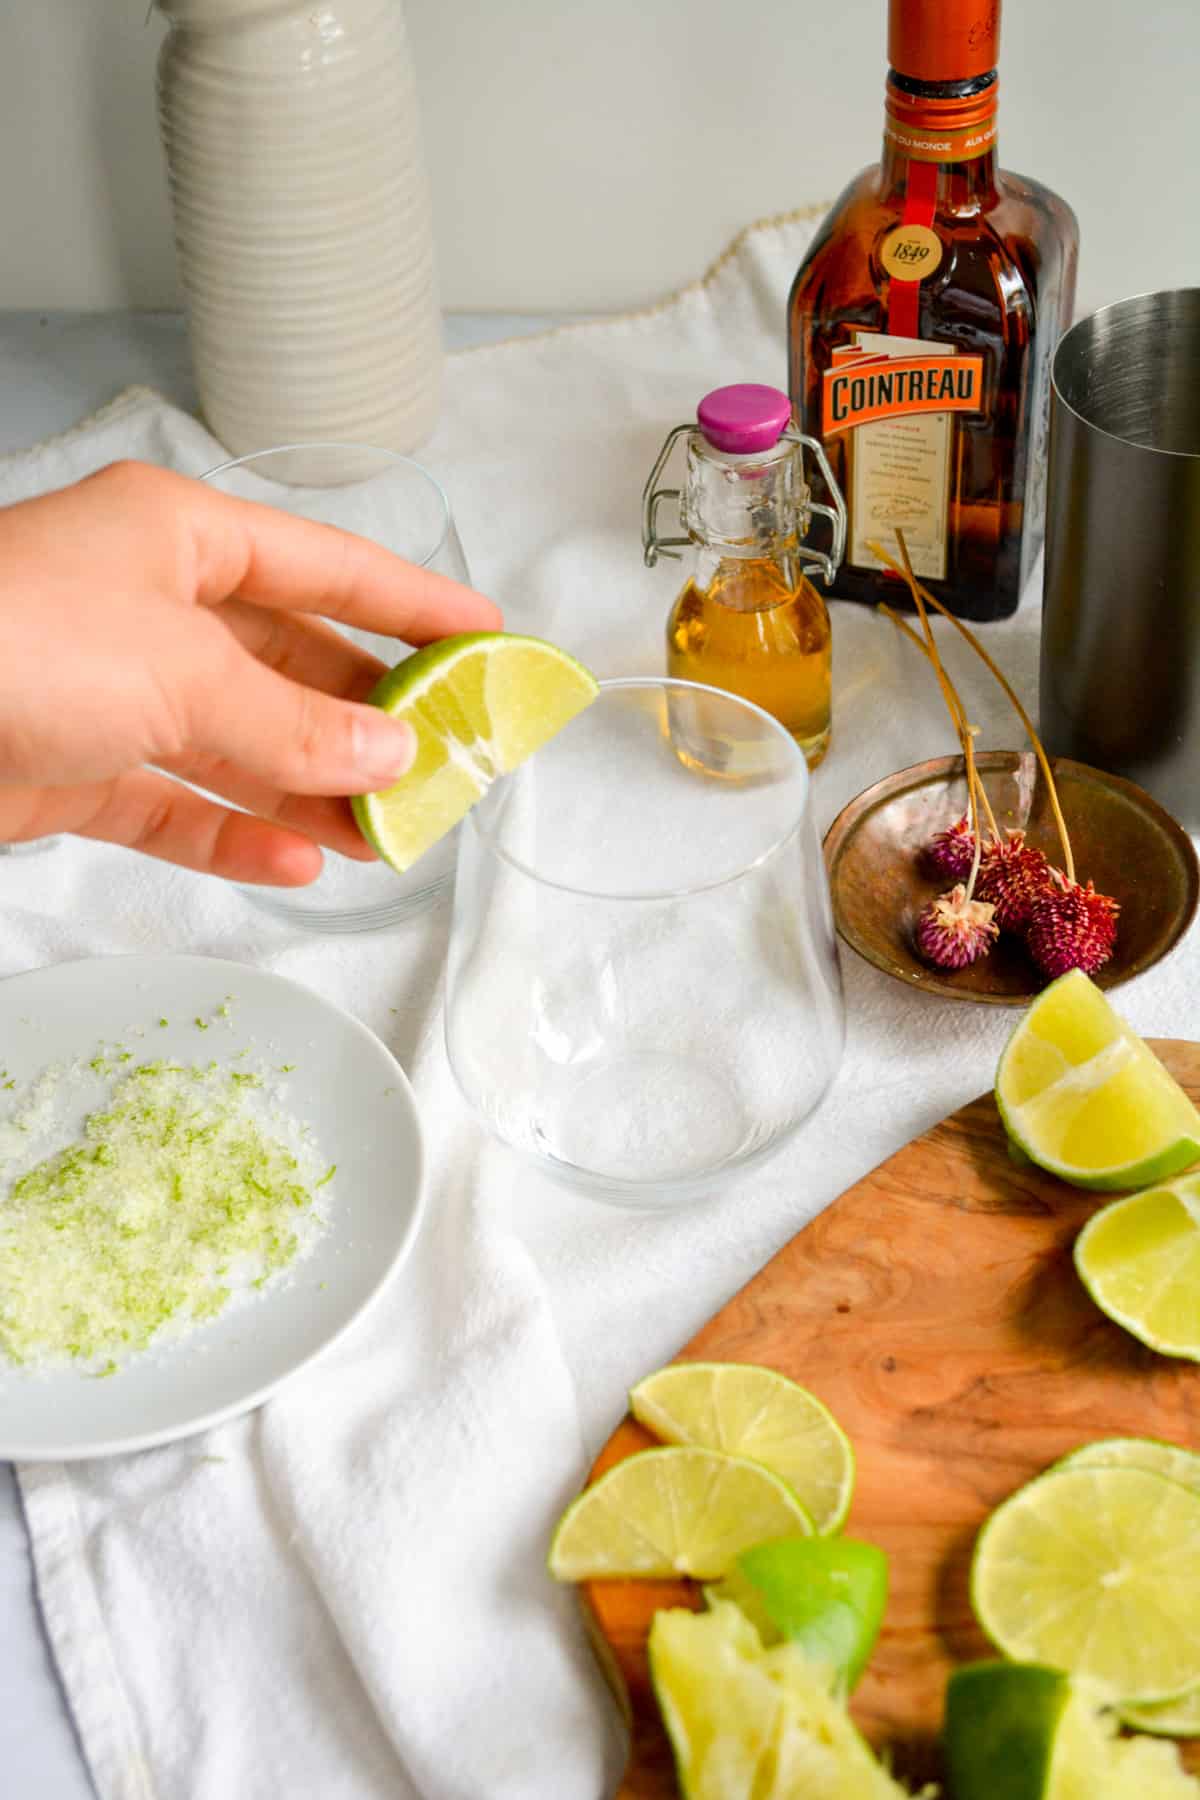 Rubbing the rim of a glass with a lime wedge.